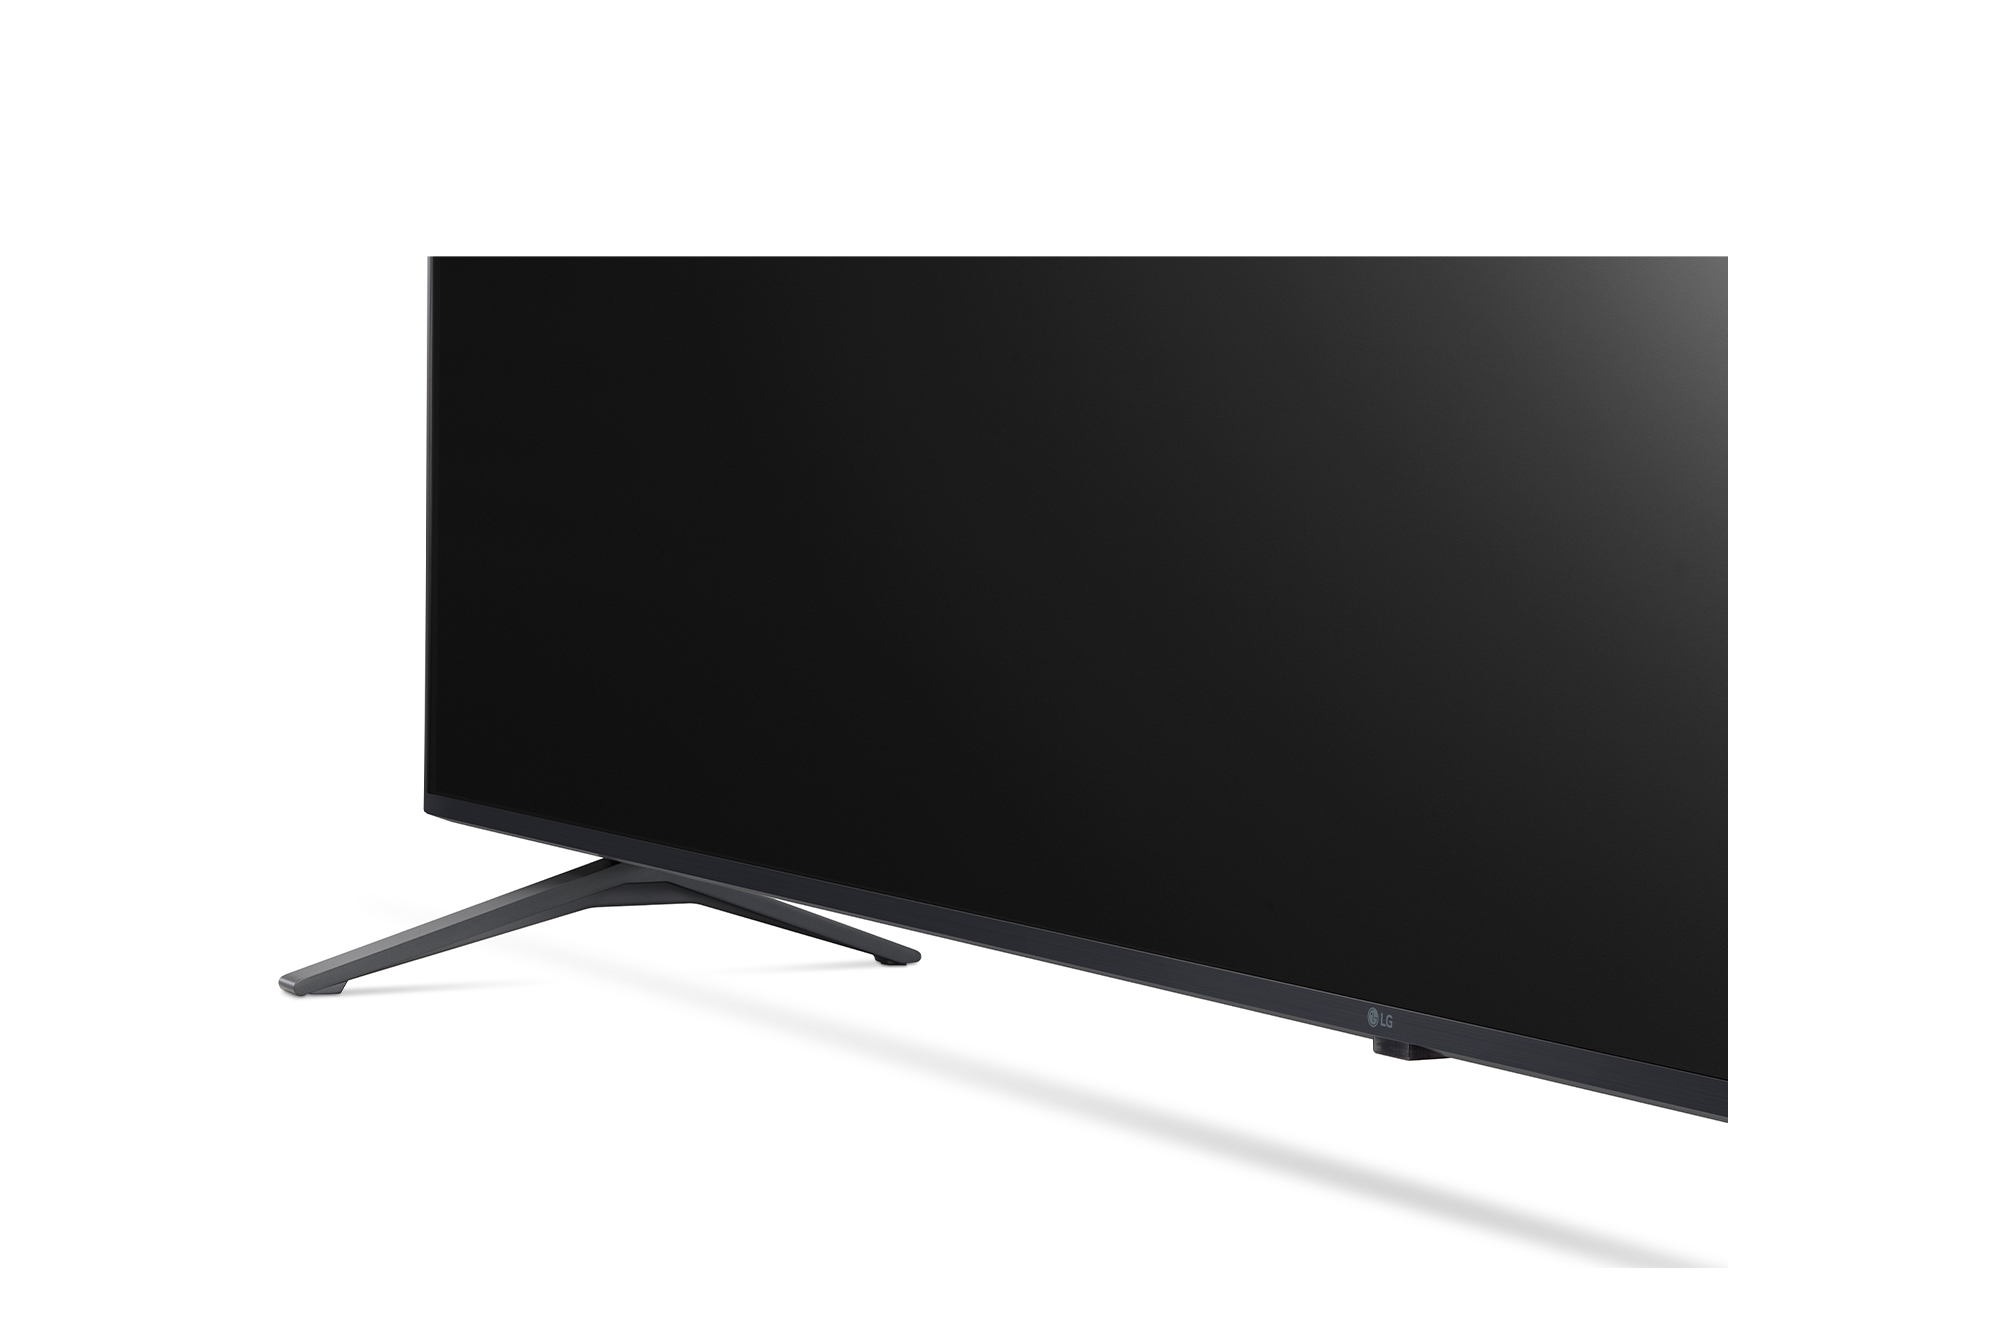 LG Commercial T V 86UR640 (86" Display UHD || SuperSign Control || Ethernet || Wifi || CMS Compatibility || DVB-T2 || 3 Years )